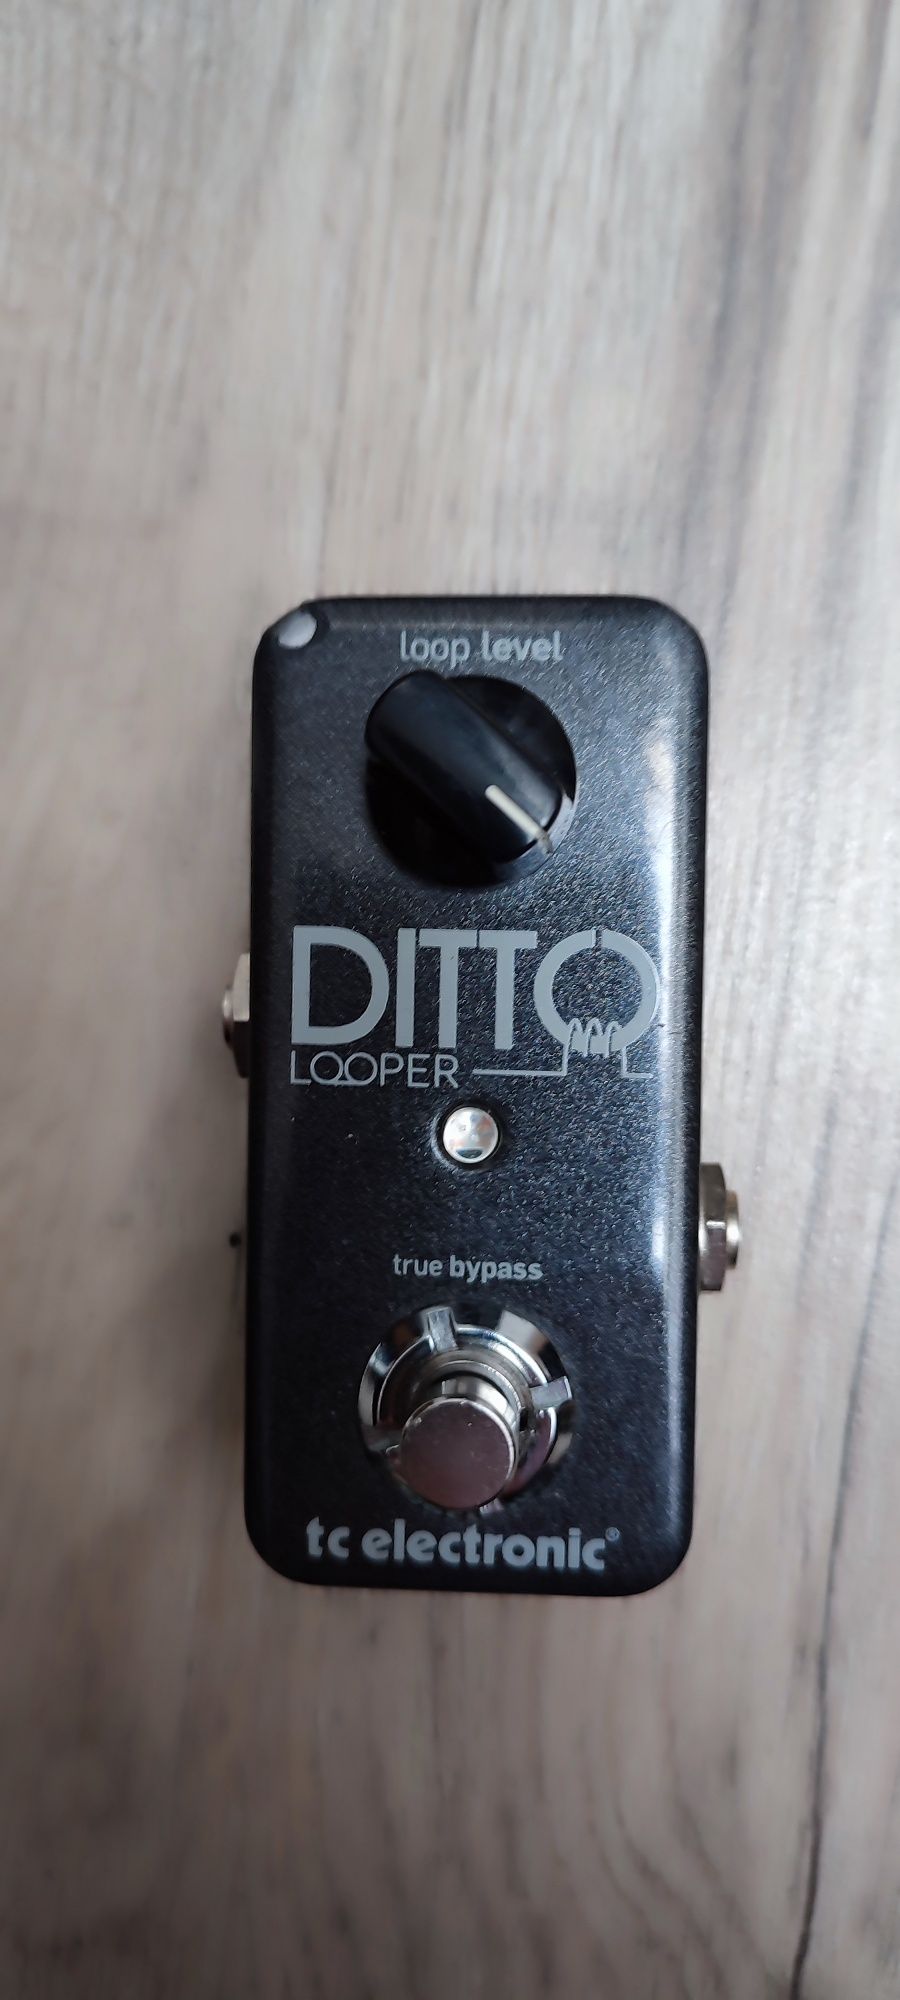 Ditto looper tc electronic